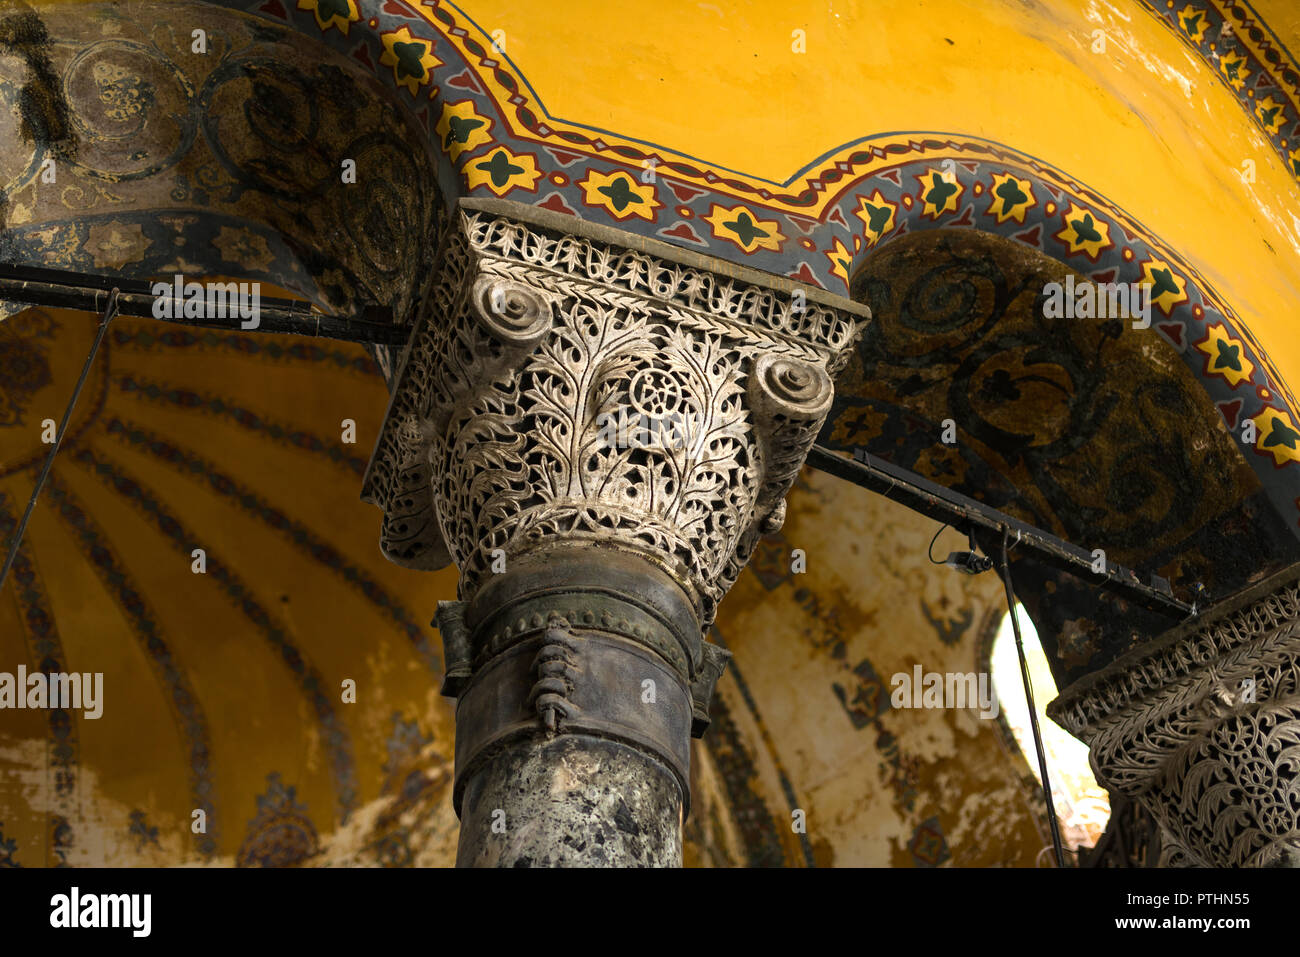 The top of an ornate stone column holding up a section of ceiling in the Hagia Sophia museum, Istanbul, Turkey Stock Photo